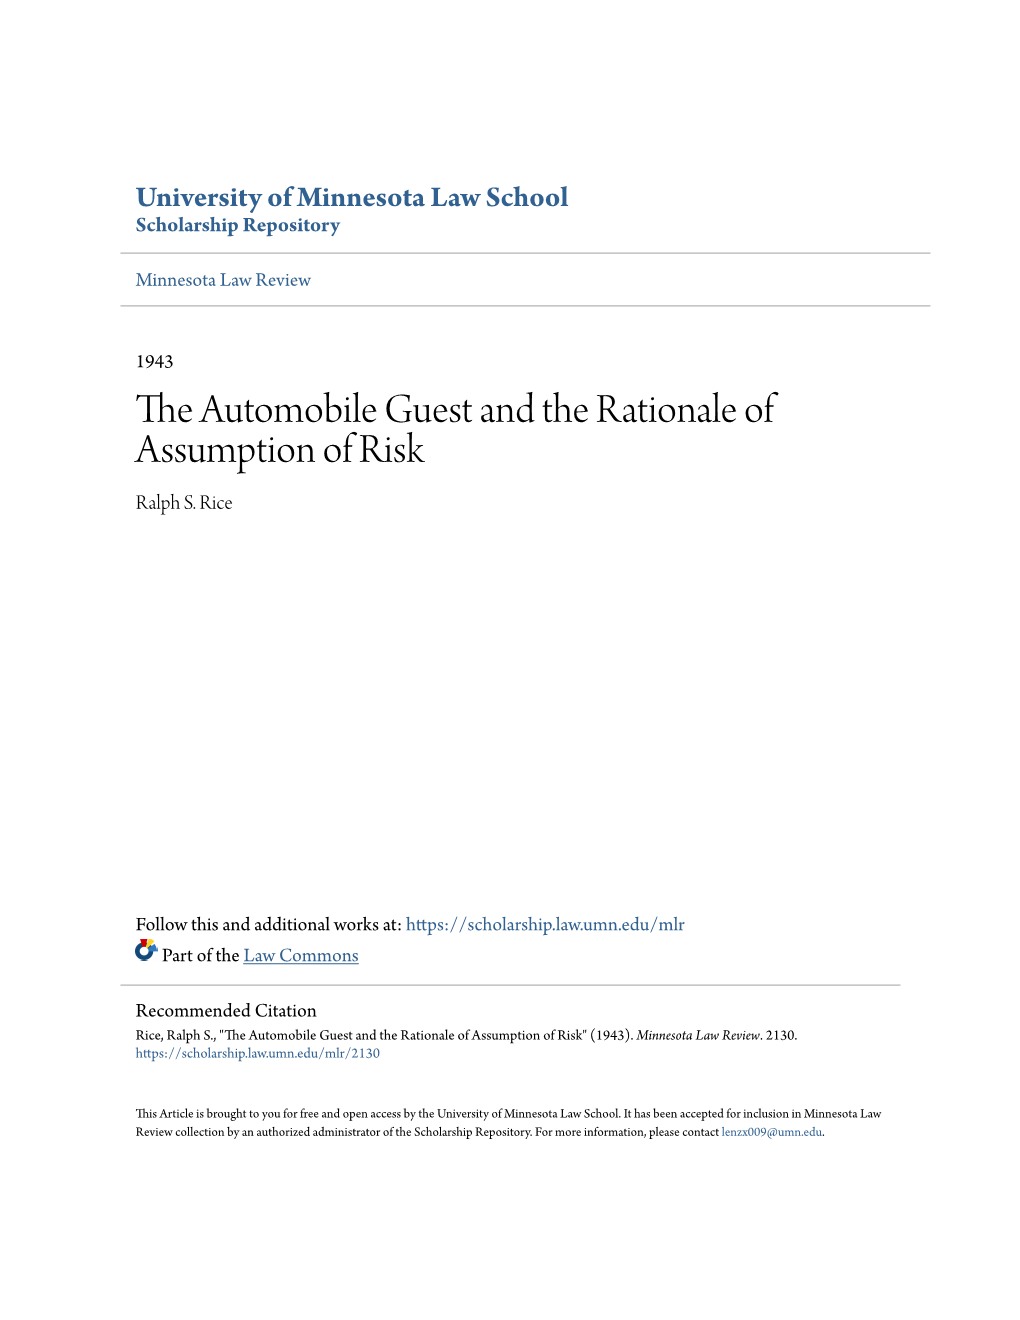 The Automobile Guest and the Rationale of Assumption of Risk Ralph S